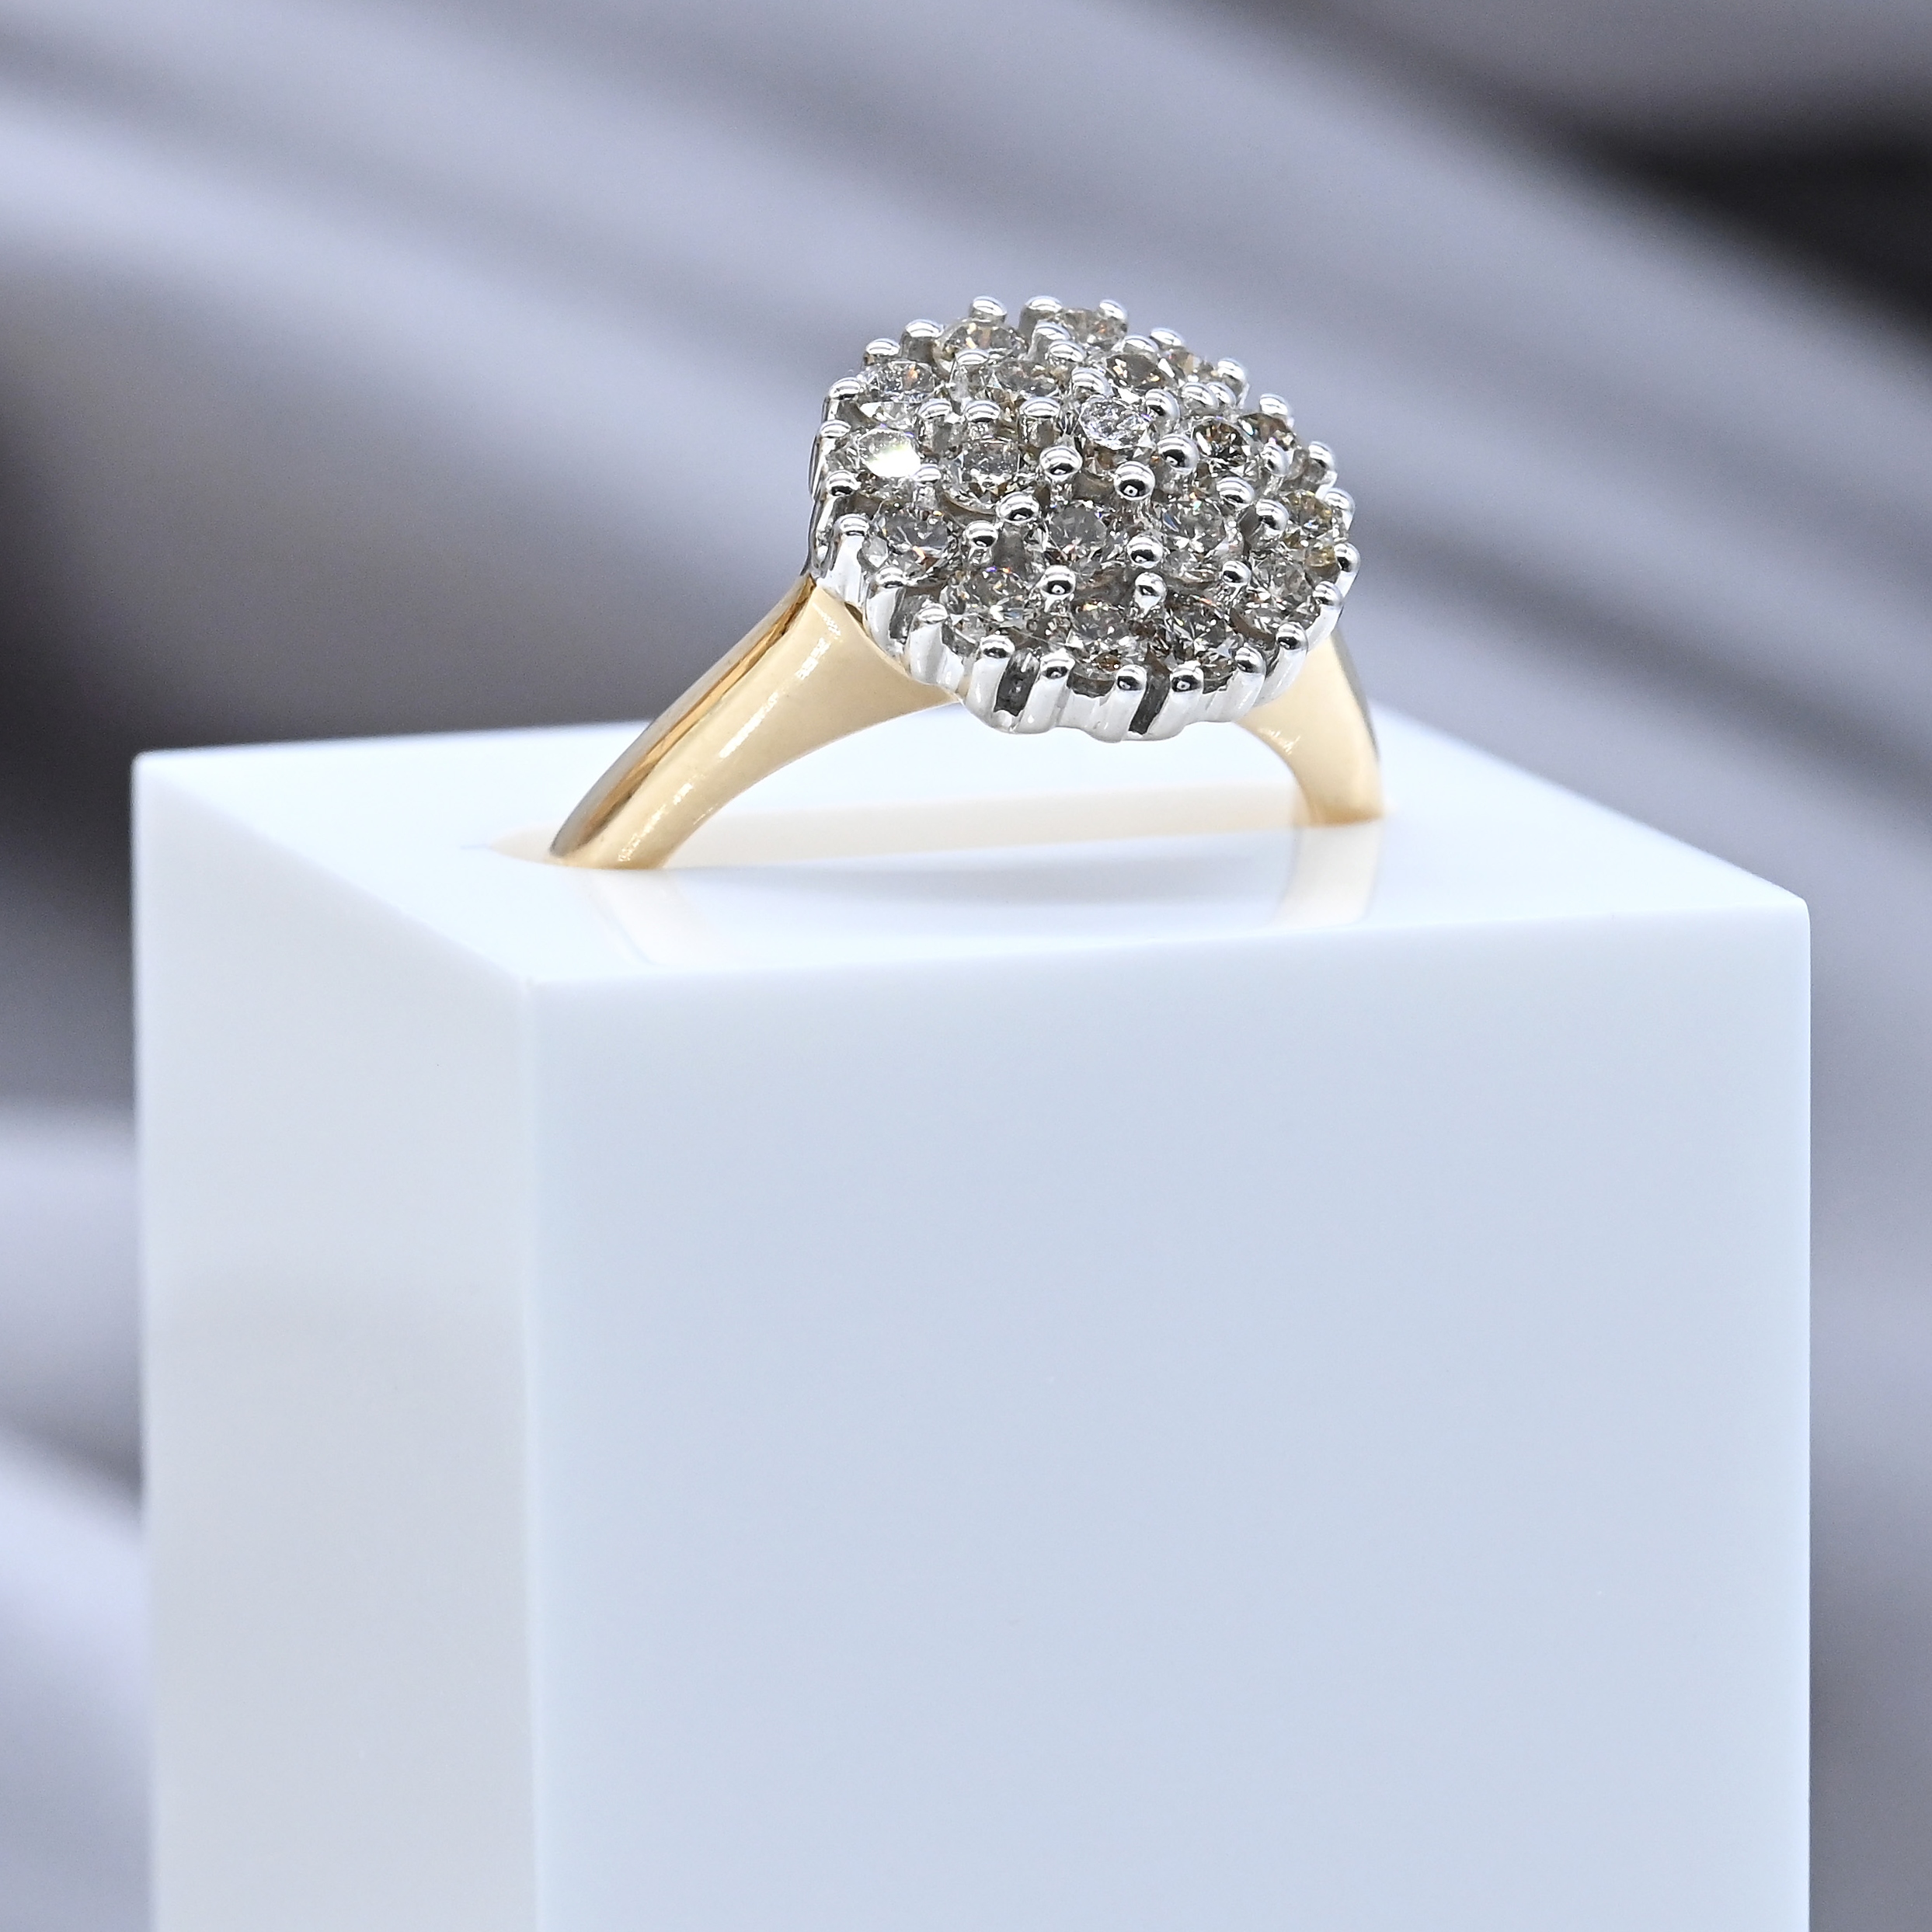 1.03 Carat Diamond Layered Cluster Ring In Yellow Gold - Image 2 of 7